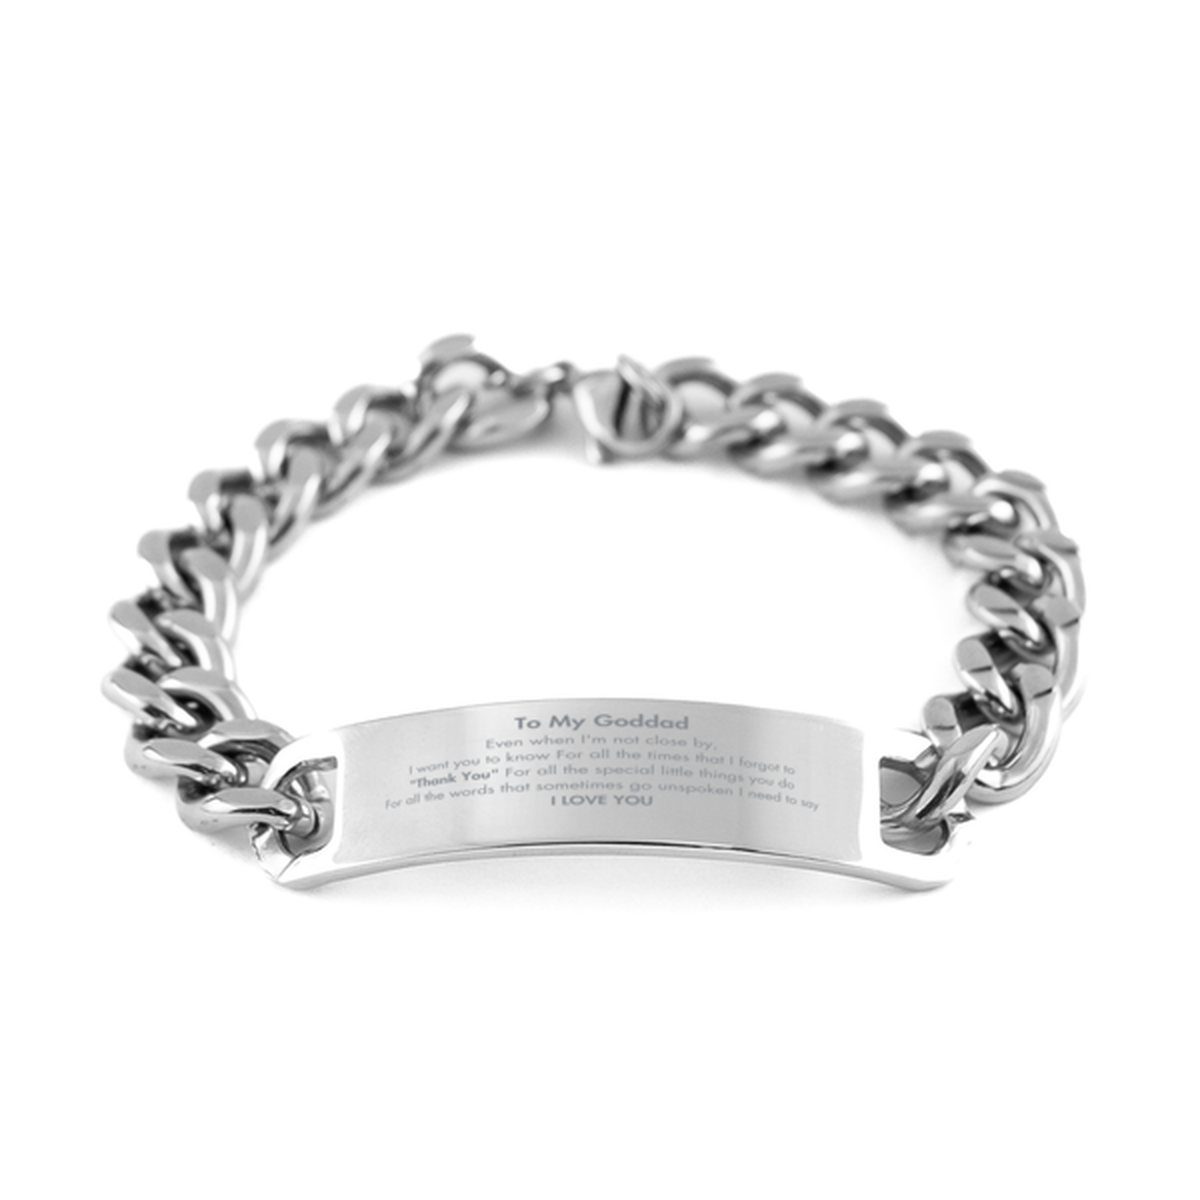 Thank You Gifts for Goddad, Keepsake Cuban Chain Stainless Steel Bracelet Gifts for Goddad Birthday Mother's day Father's Day Goddad For all the words That sometimes go unspoken I need to say I LOVE YOU